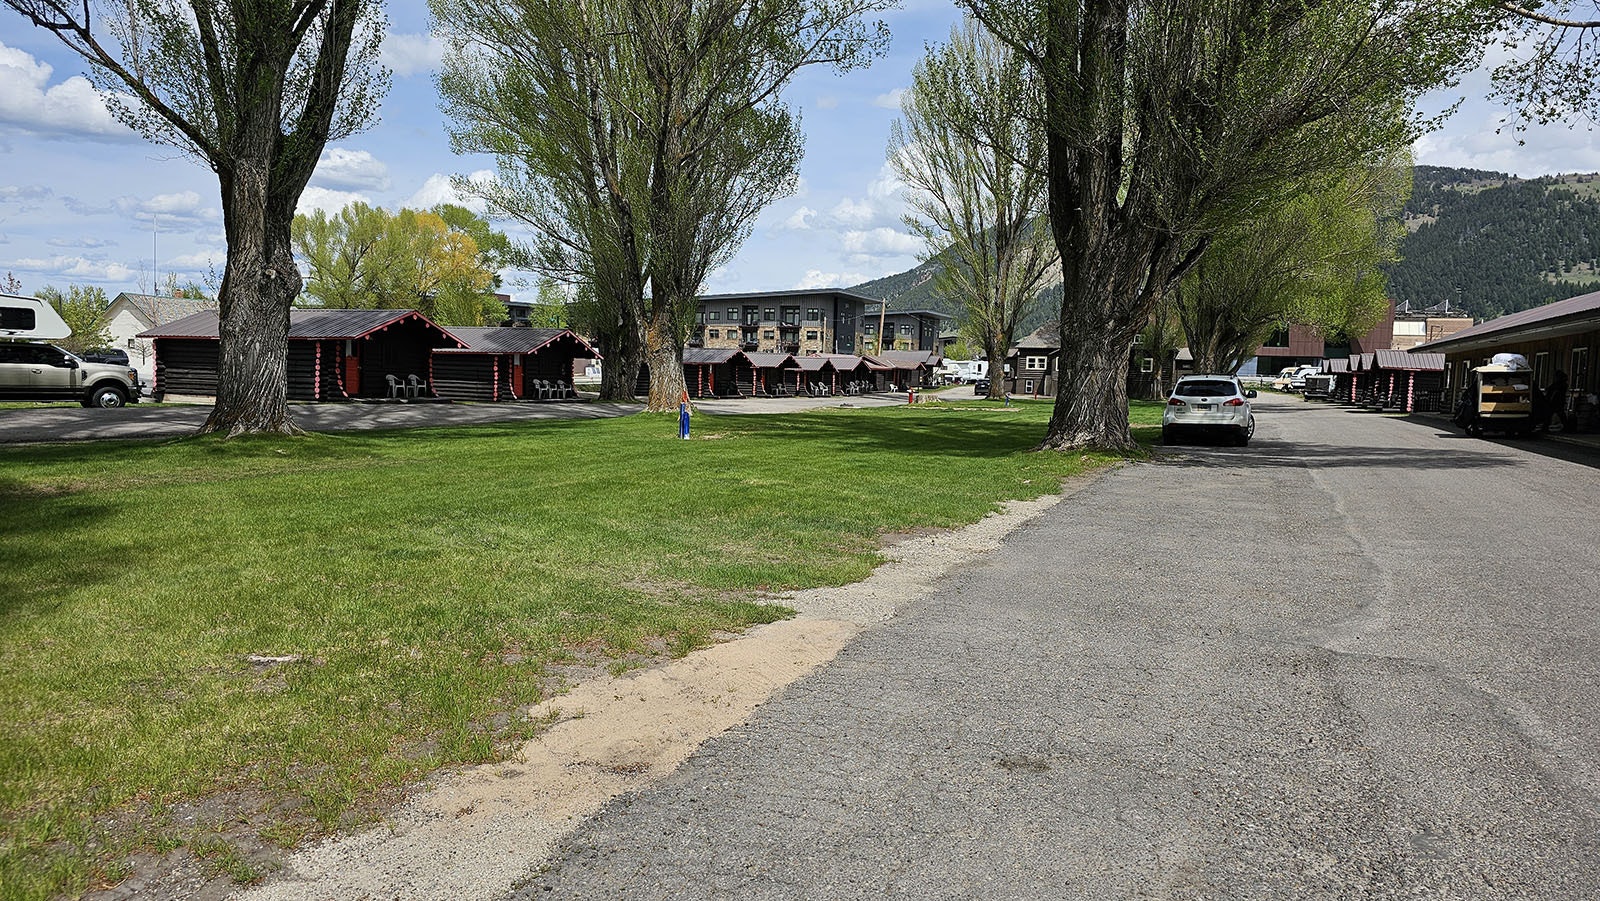 The cabins surround a parklike area in the center. No picnic tables, though.